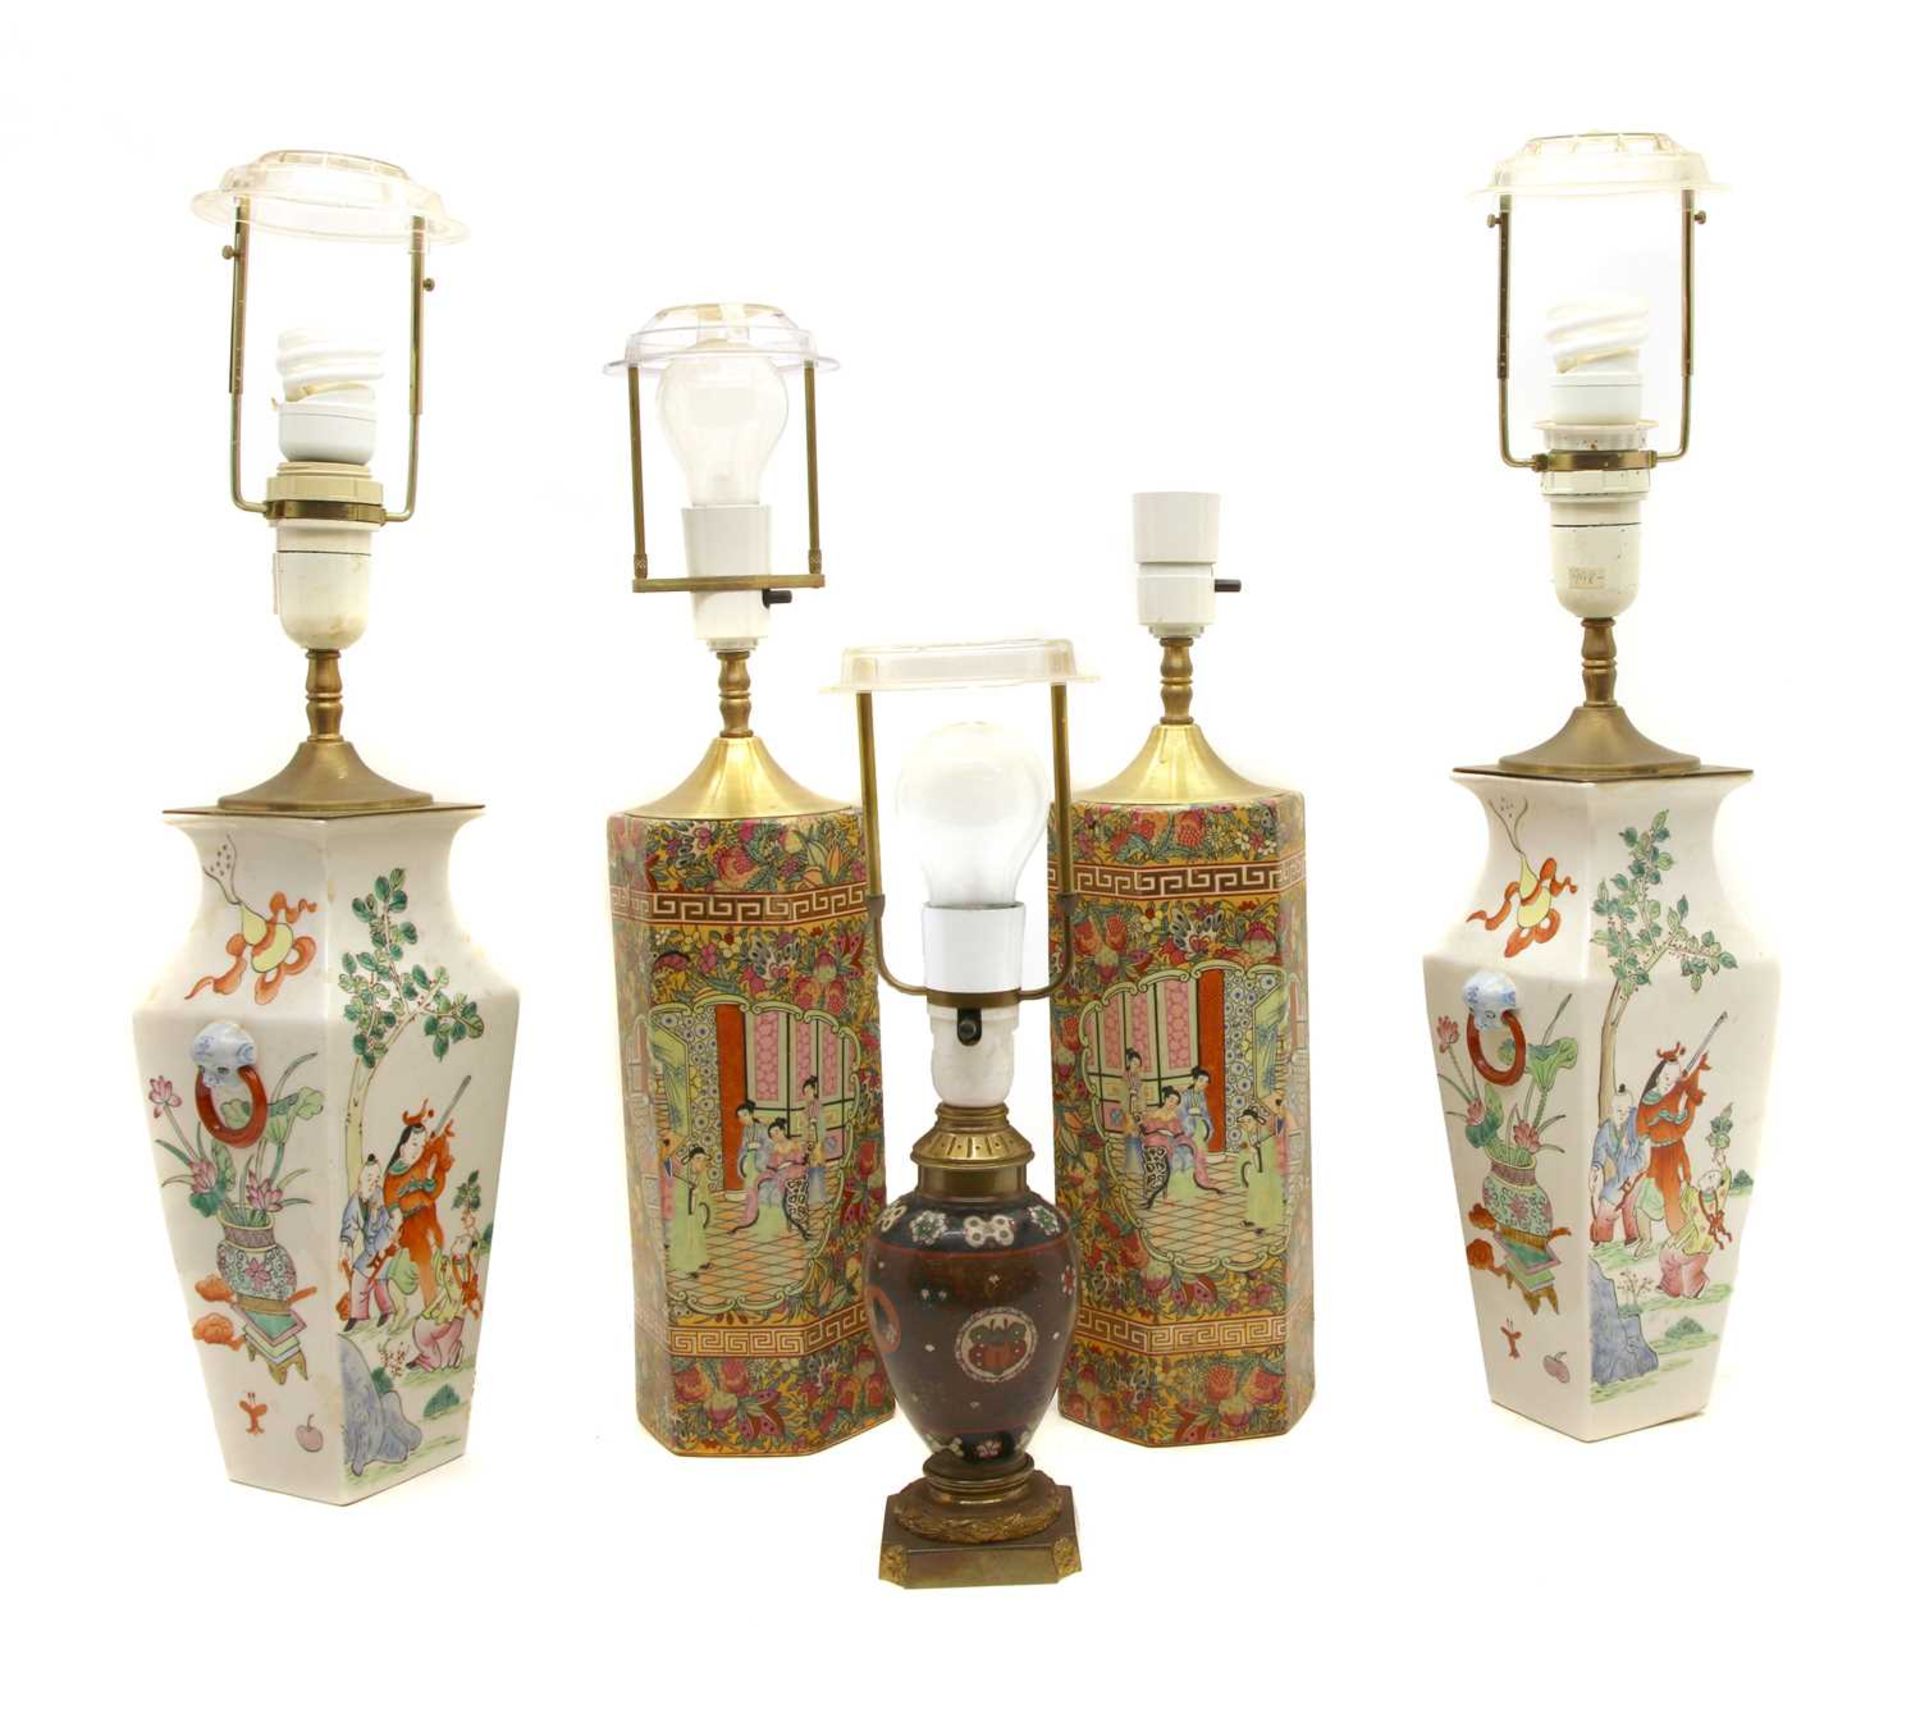 Two pairs of modern Chinese lamps - Image 2 of 2